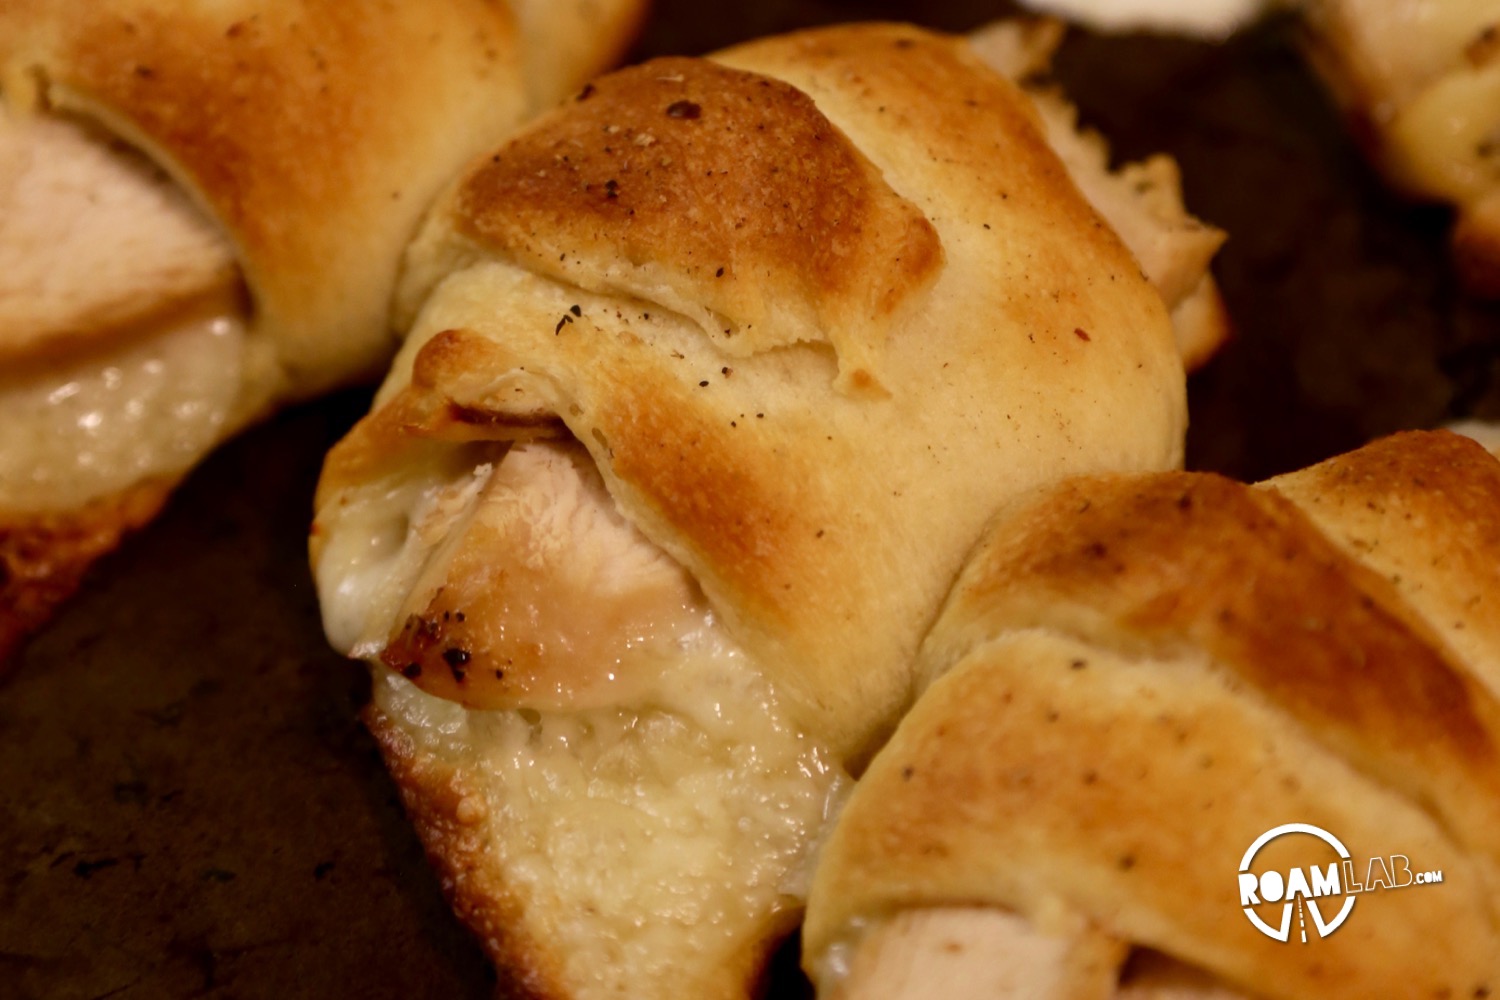 Sometimes I can't decide if I want breakfast or lunch. I find Chicken, Mozzarella, And Basil Crescents are a little bit of both.